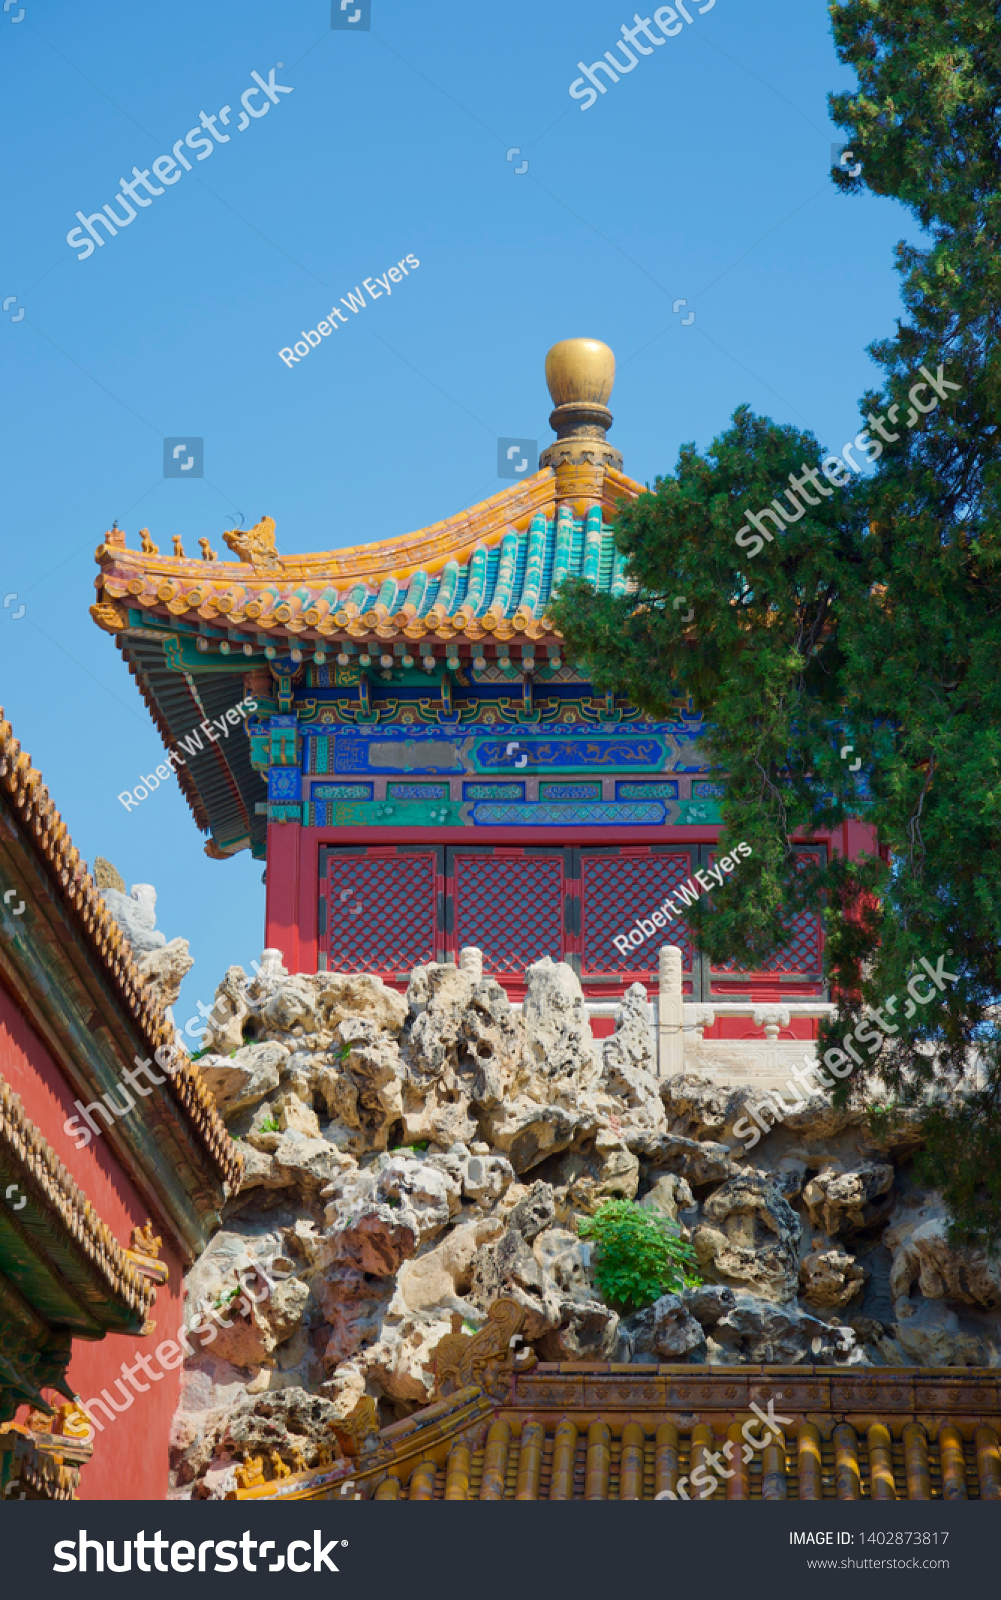 A sunlit rockery and tree in foreground, with a vibrant, brightly painted Chinese temple (pagoda) in gold, blue, green and red against bright sky #1402873817